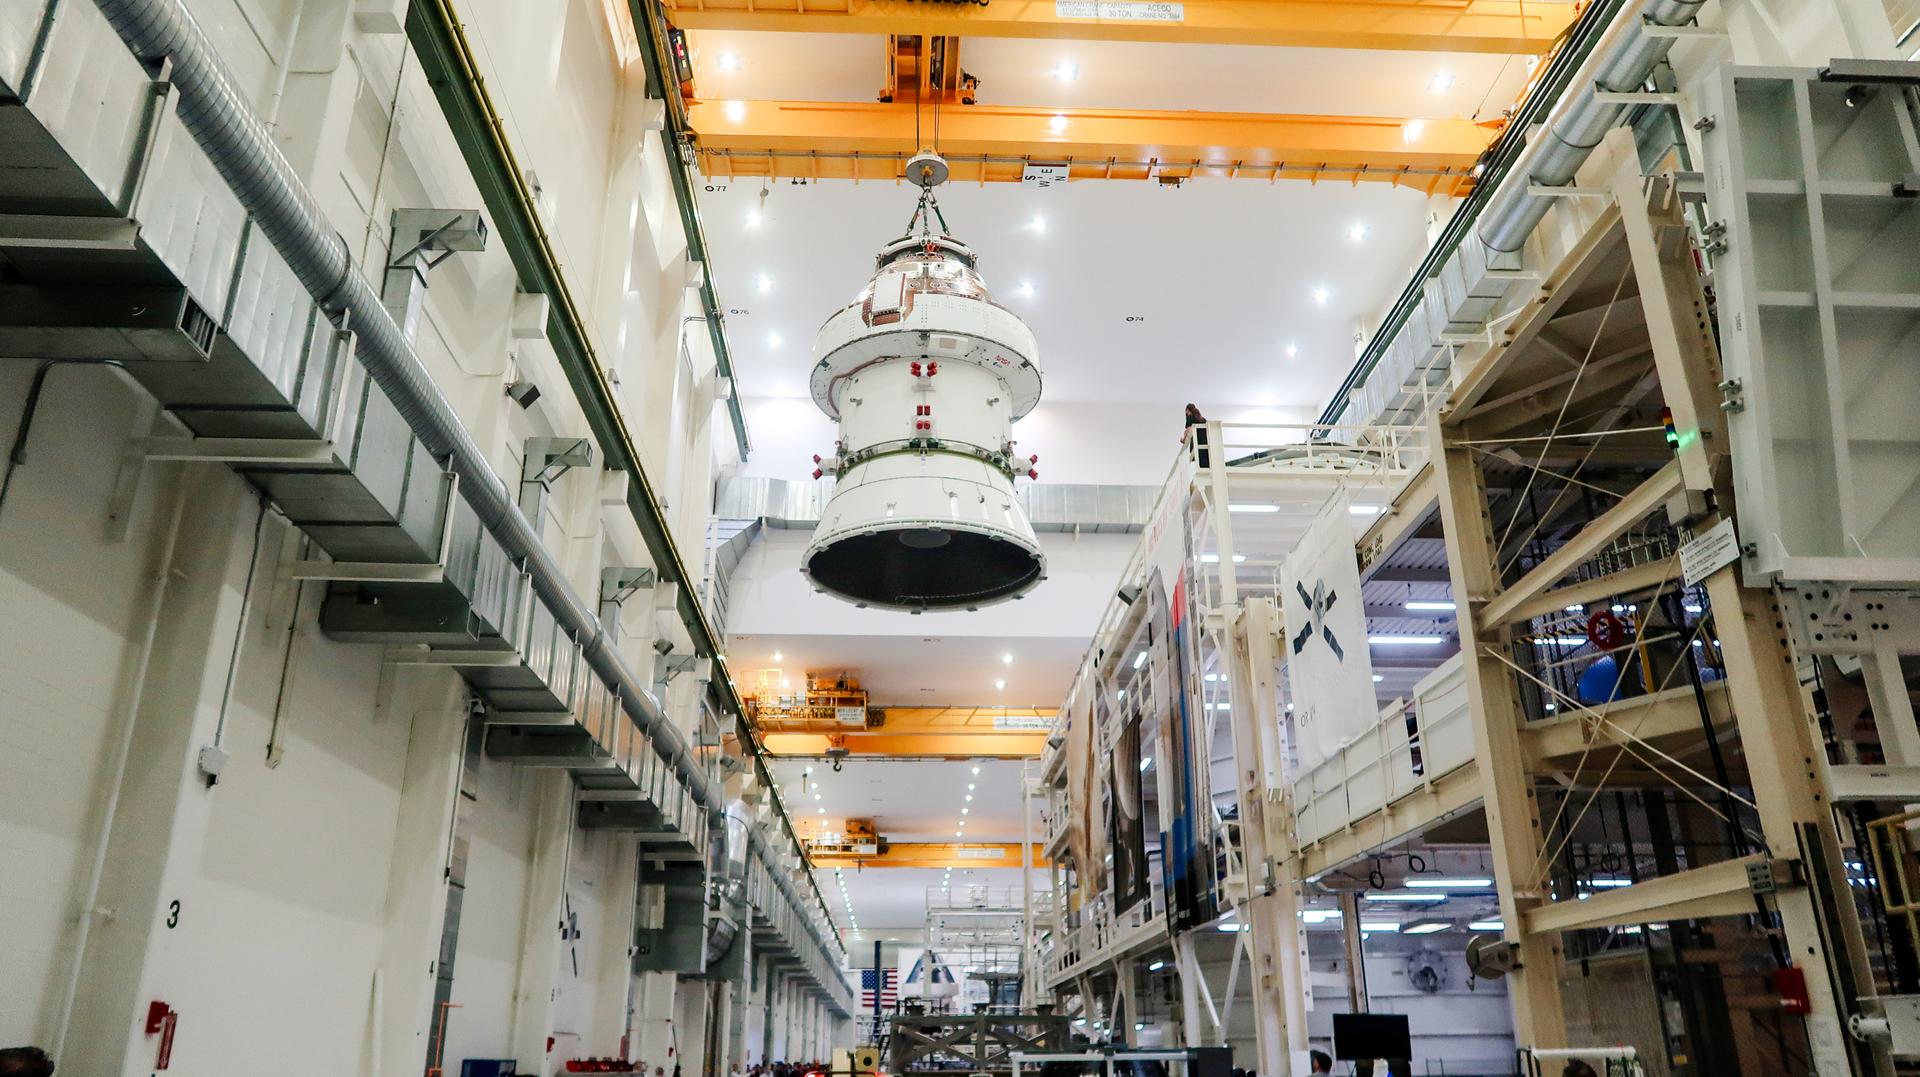 a cone-shaped spacecraft in the rafters being hoisted between the walls